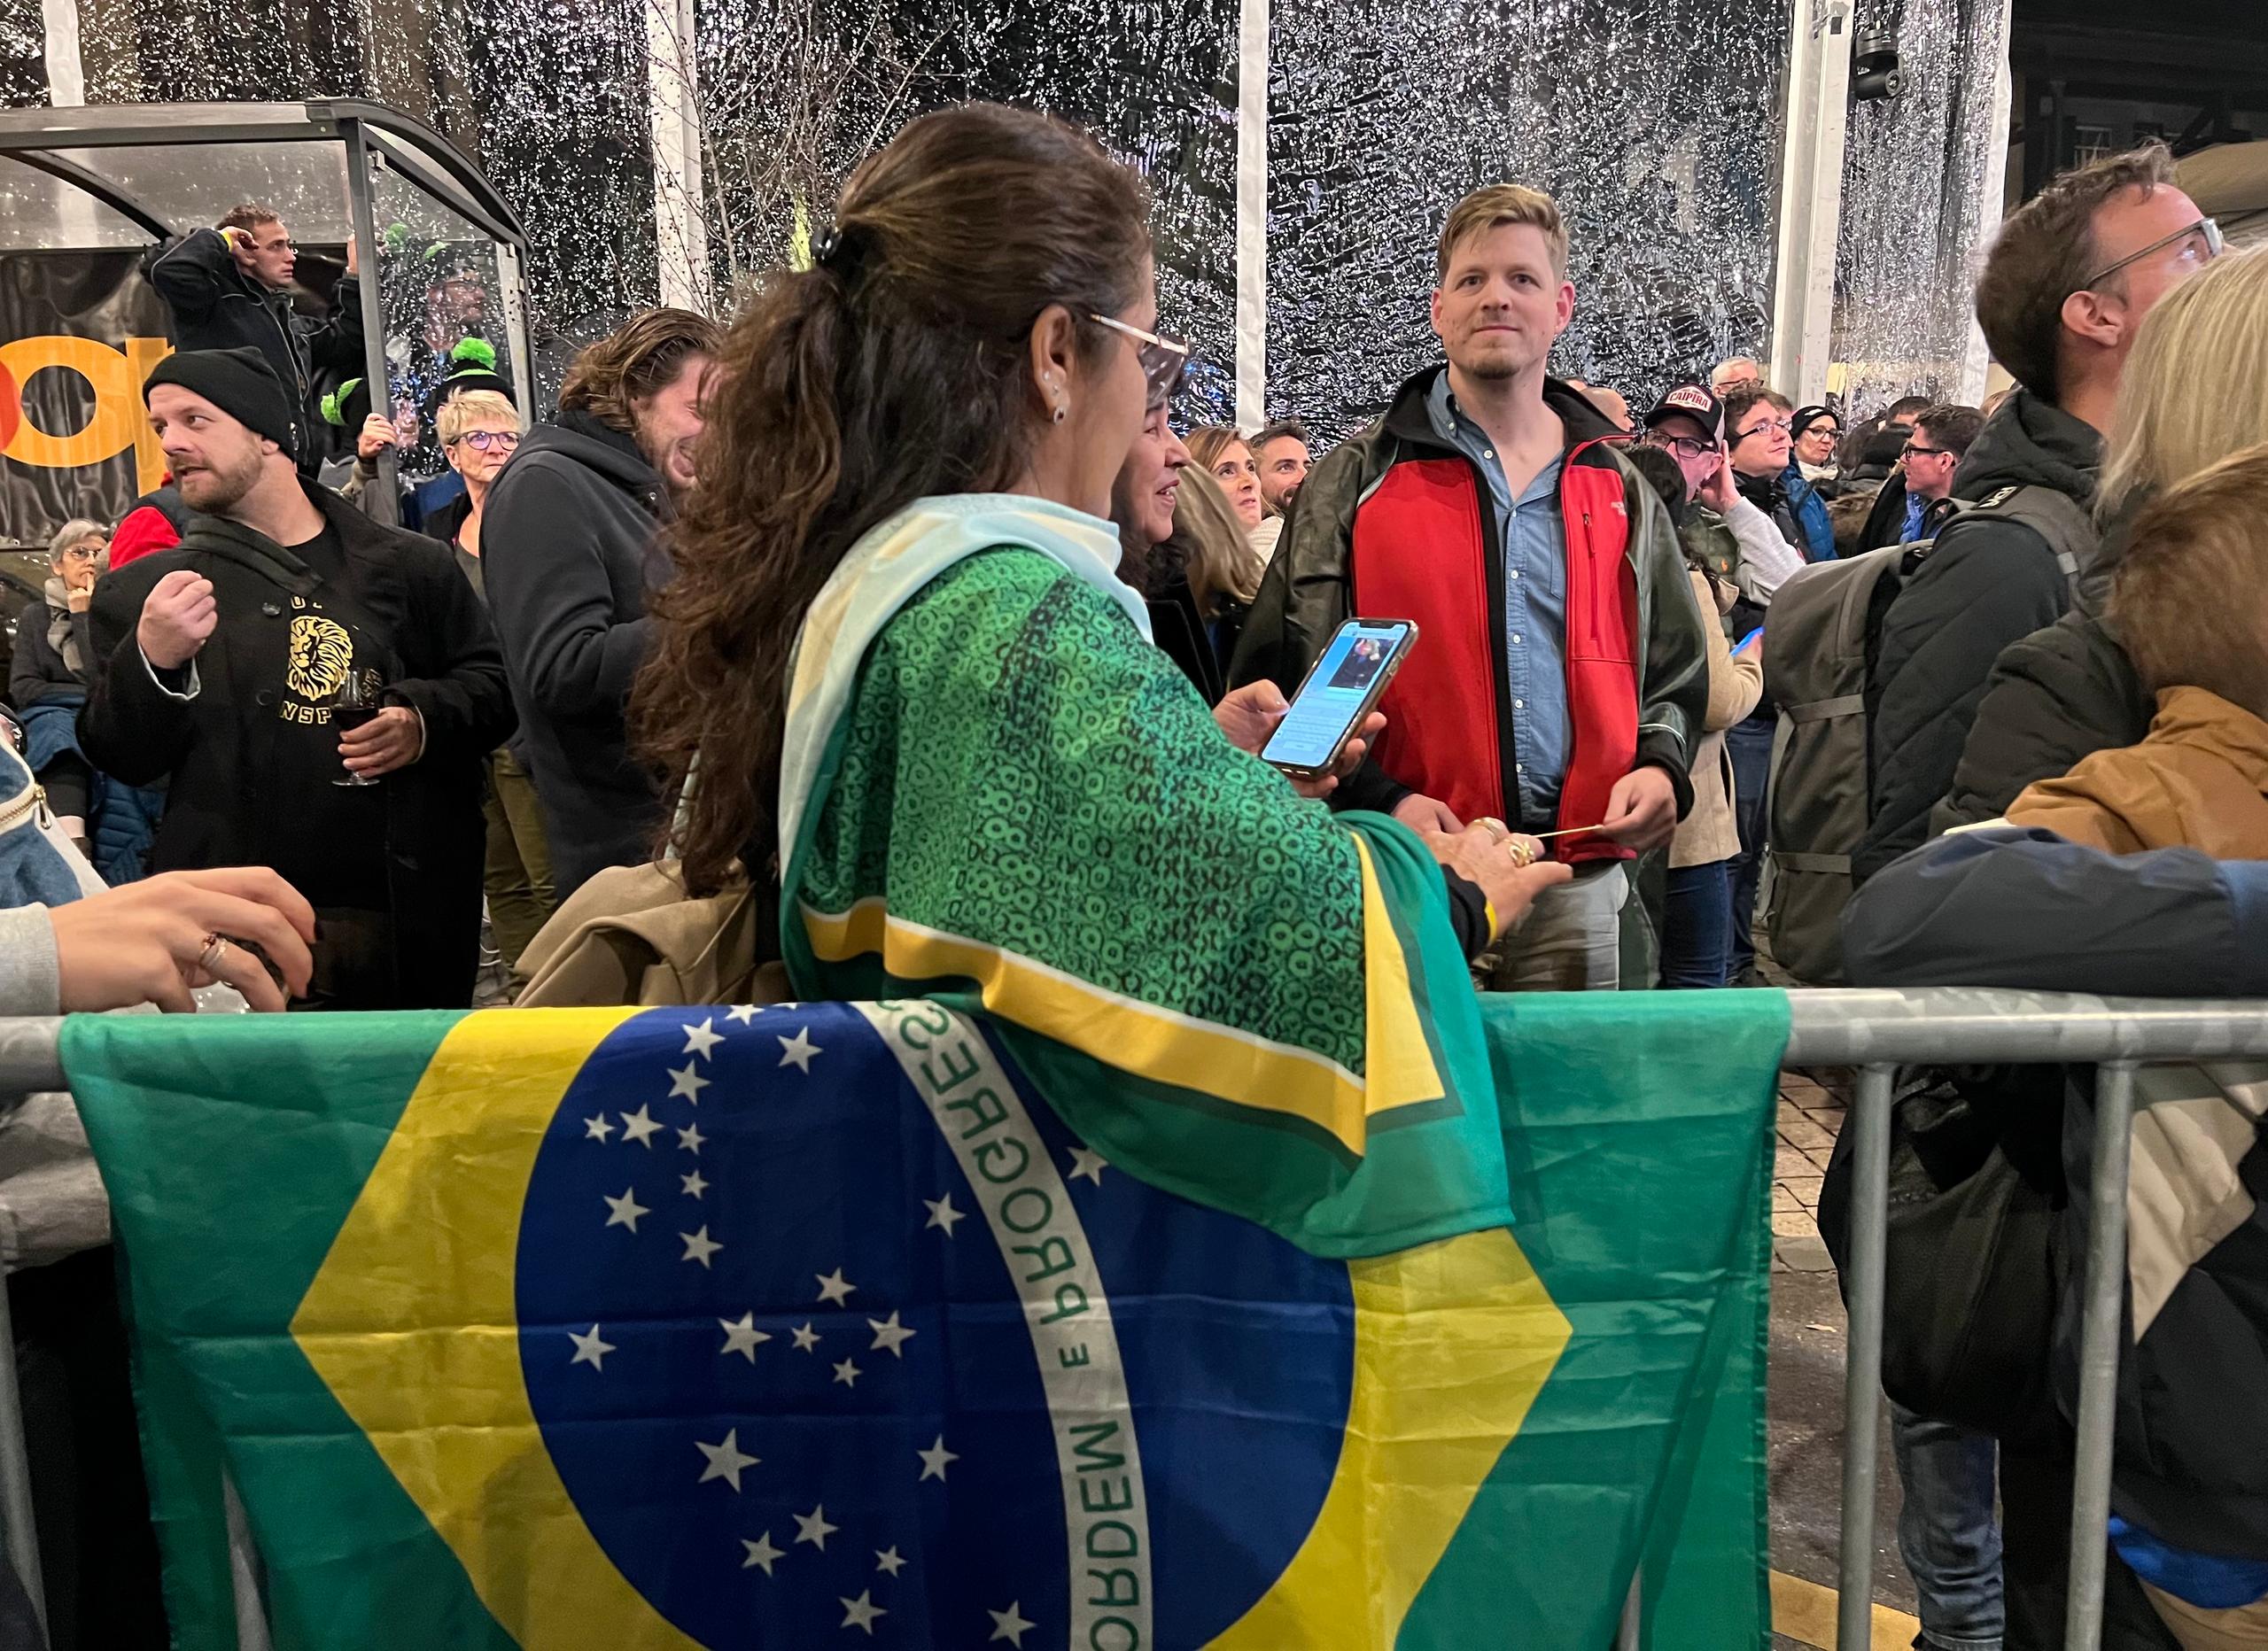 Many Brazilians living in Switzerland came to cheer on the fondue that came from the heat.